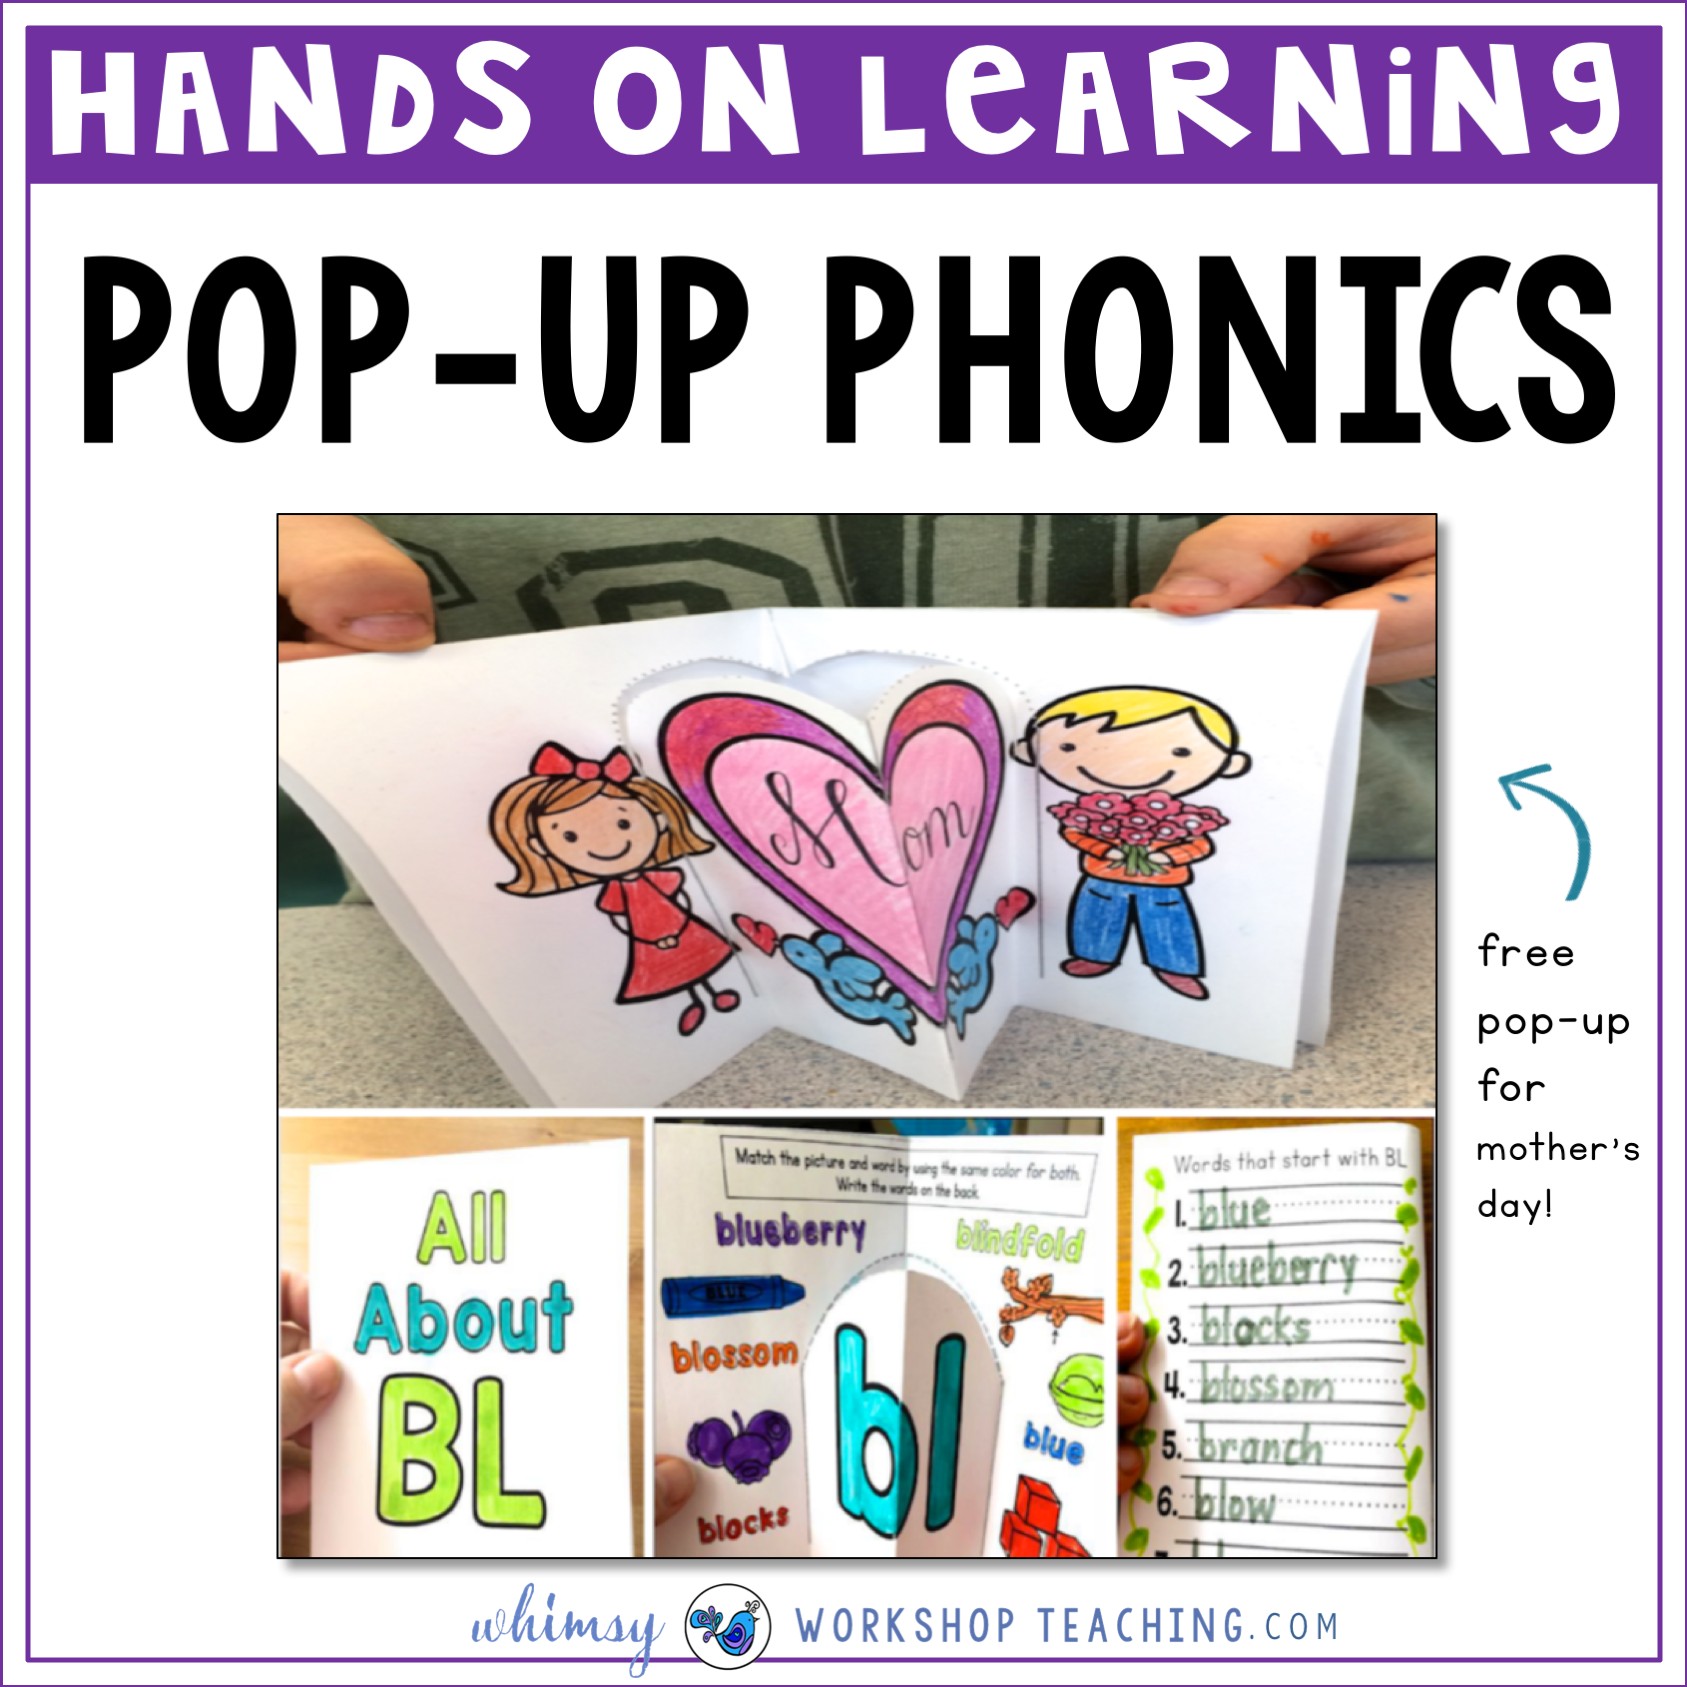 Hands on learning with pop up phonics